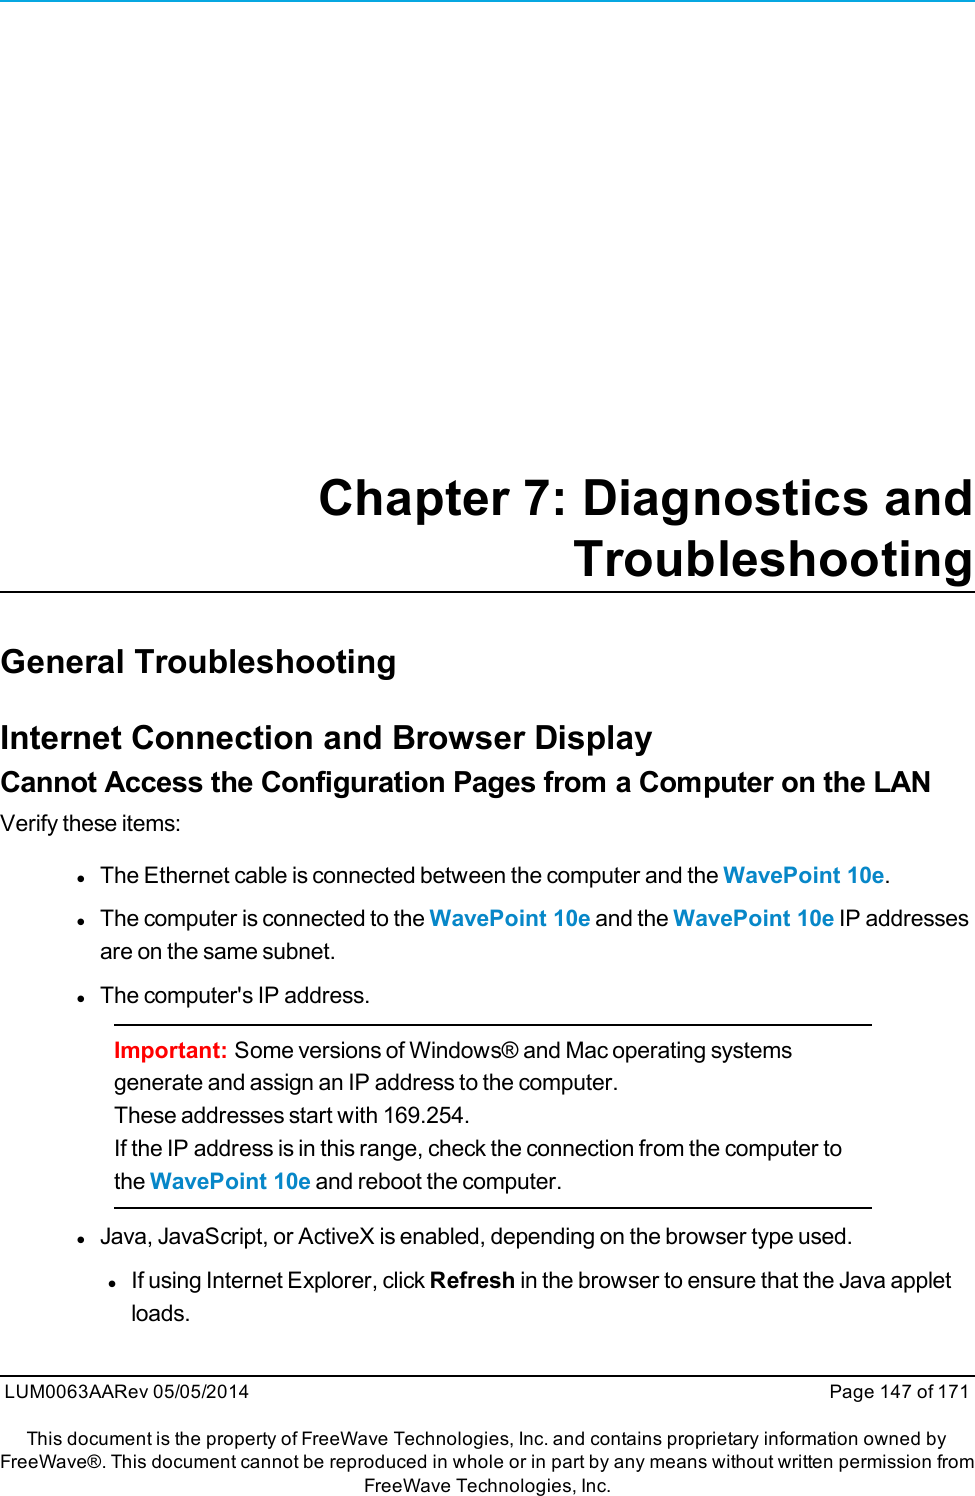 Chapter 7: Diagnostics andTroubleshootingGeneral TroubleshootingInternet Connection and Browser DisplayCannot Access the Configuration Pages from a Computer on the LANVerify these items:lThe Ethernet cable is connected between the computer and the WavePoint 10e.lThe computer is connected to the WavePoint 10e and the WavePoint 10e IP addressesare on the same subnet.lThe computer&apos;s IP address.Important: Some versions of Windows® and Mac operating systemsgenerate and assign an IP address to the computer.These addresses start with 169.254.If the IP address is in this range, check the connection from the computer tothe WavePoint 10e and reboot the computer.lJava, JavaScript, or ActiveX is enabled, depending on the browser type used.lIf using Internet Explorer, click Refresh in the browser to ensure that the Java appletloads.LUM0063AARev 05/05/2014 Page 147 of 171This document is the property of FreeWave Technologies, Inc. and contains proprietary information owned byFreeWave®. This document cannot be reproduced in whole or in part by any means without written permission fromFreeWave Technologies, Inc.